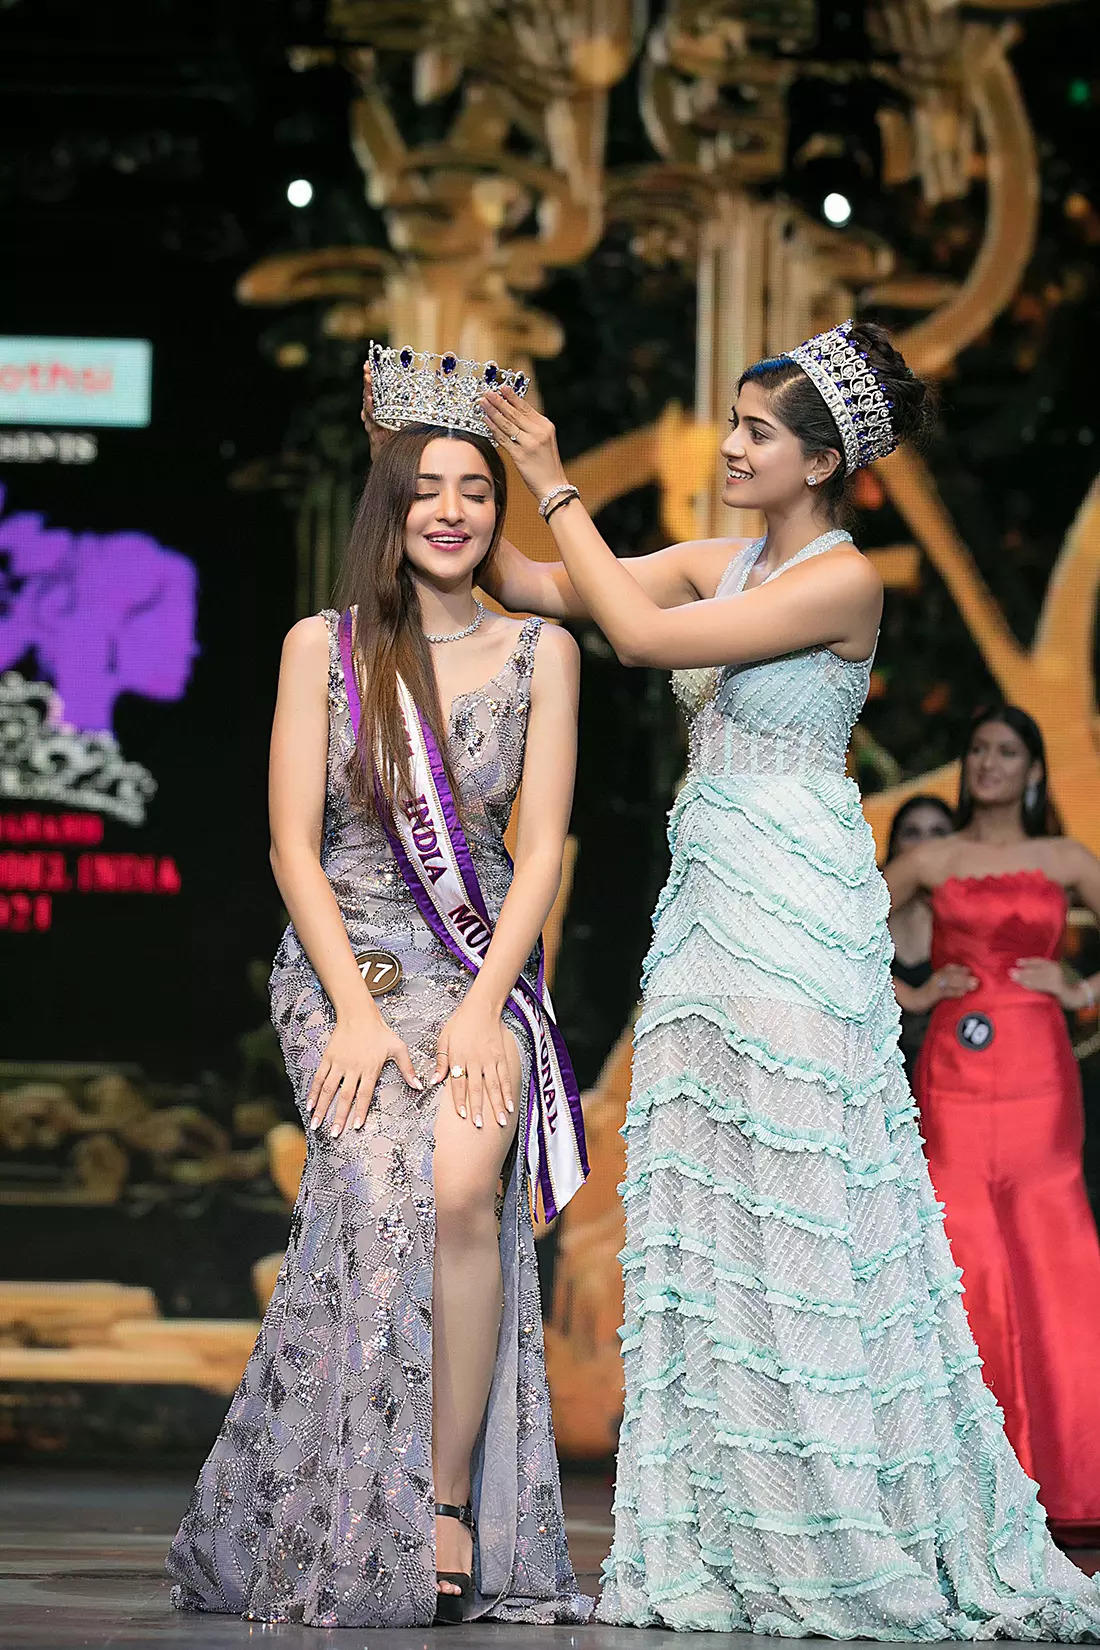 Pictures of Divija Gambhir who wins Glamanand Supermodel India 2021, will represent India at Miss Multinational